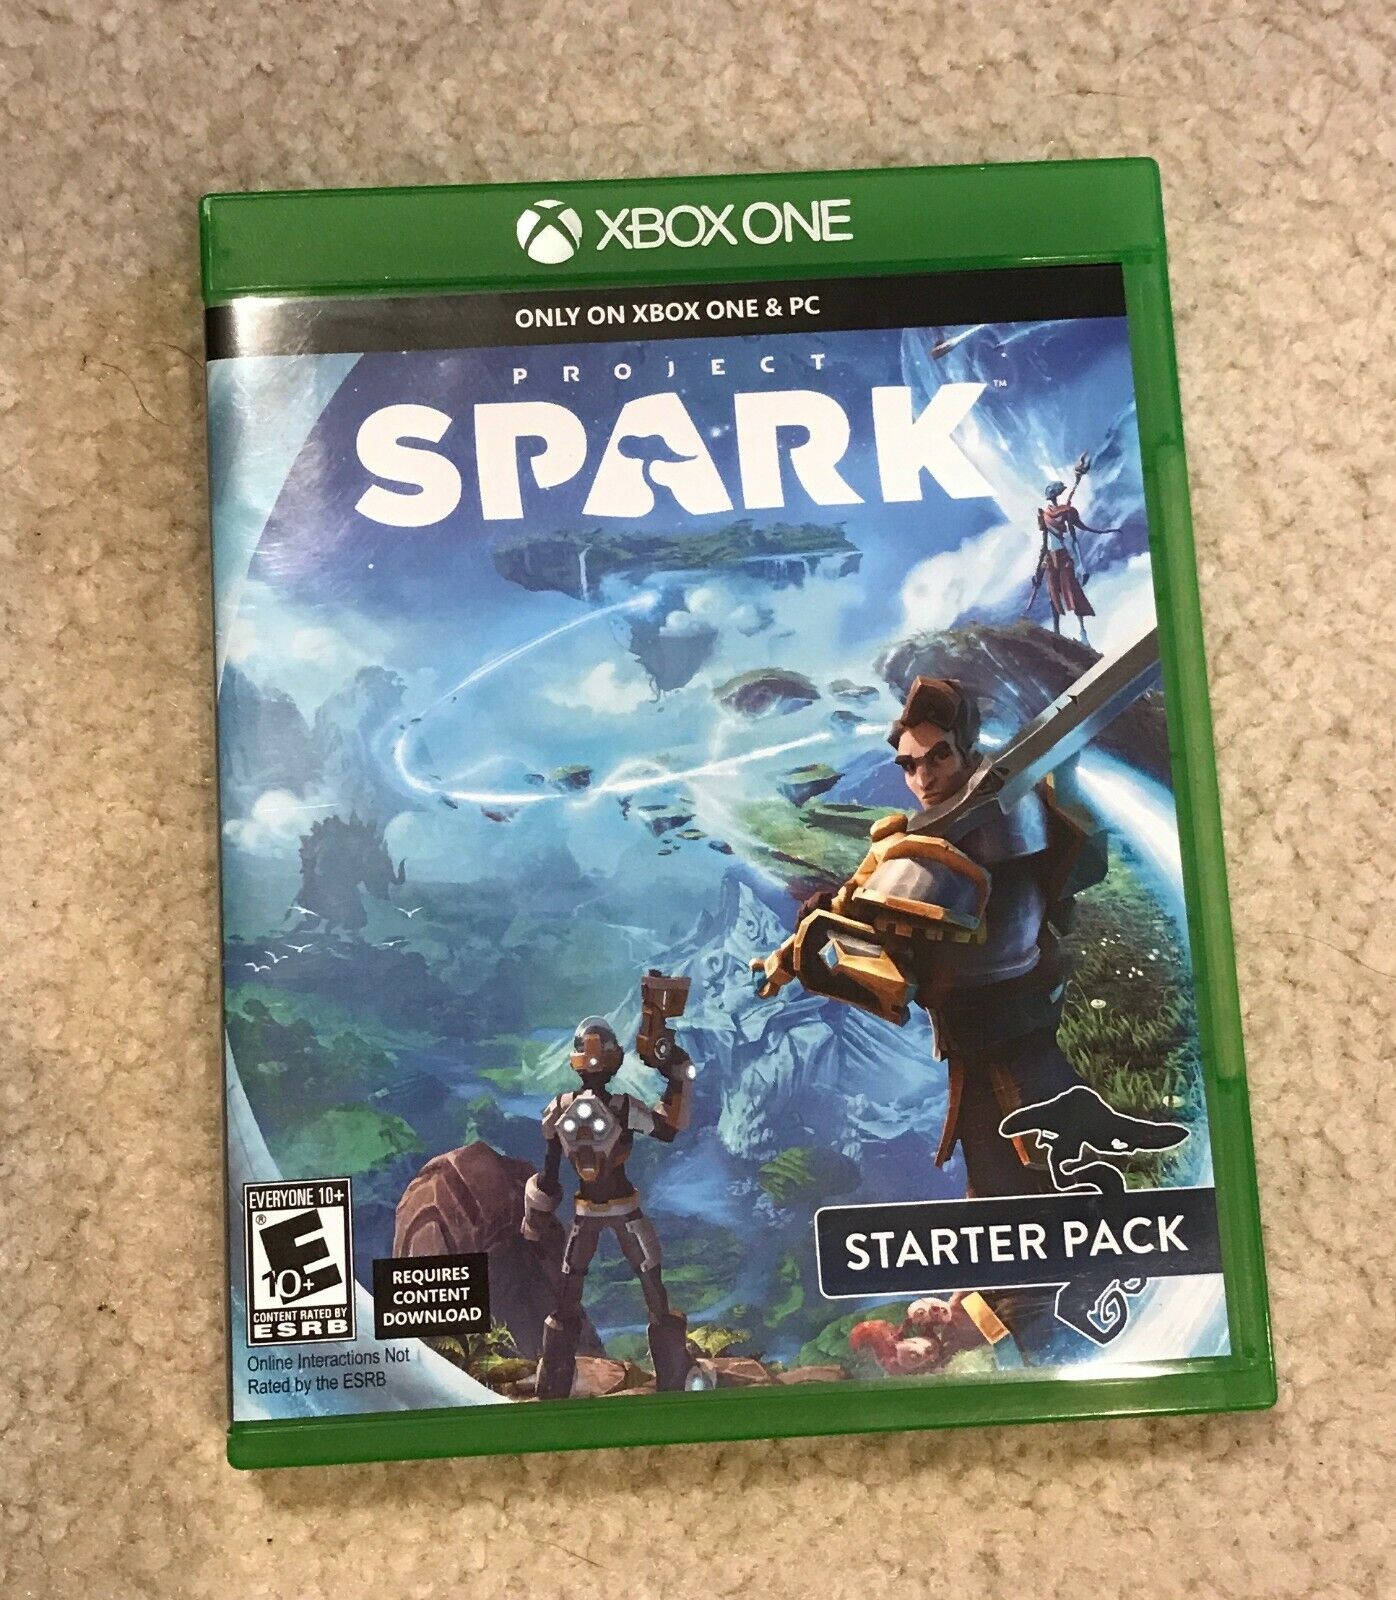 XBOX One Project Spark E 10+ Video Game